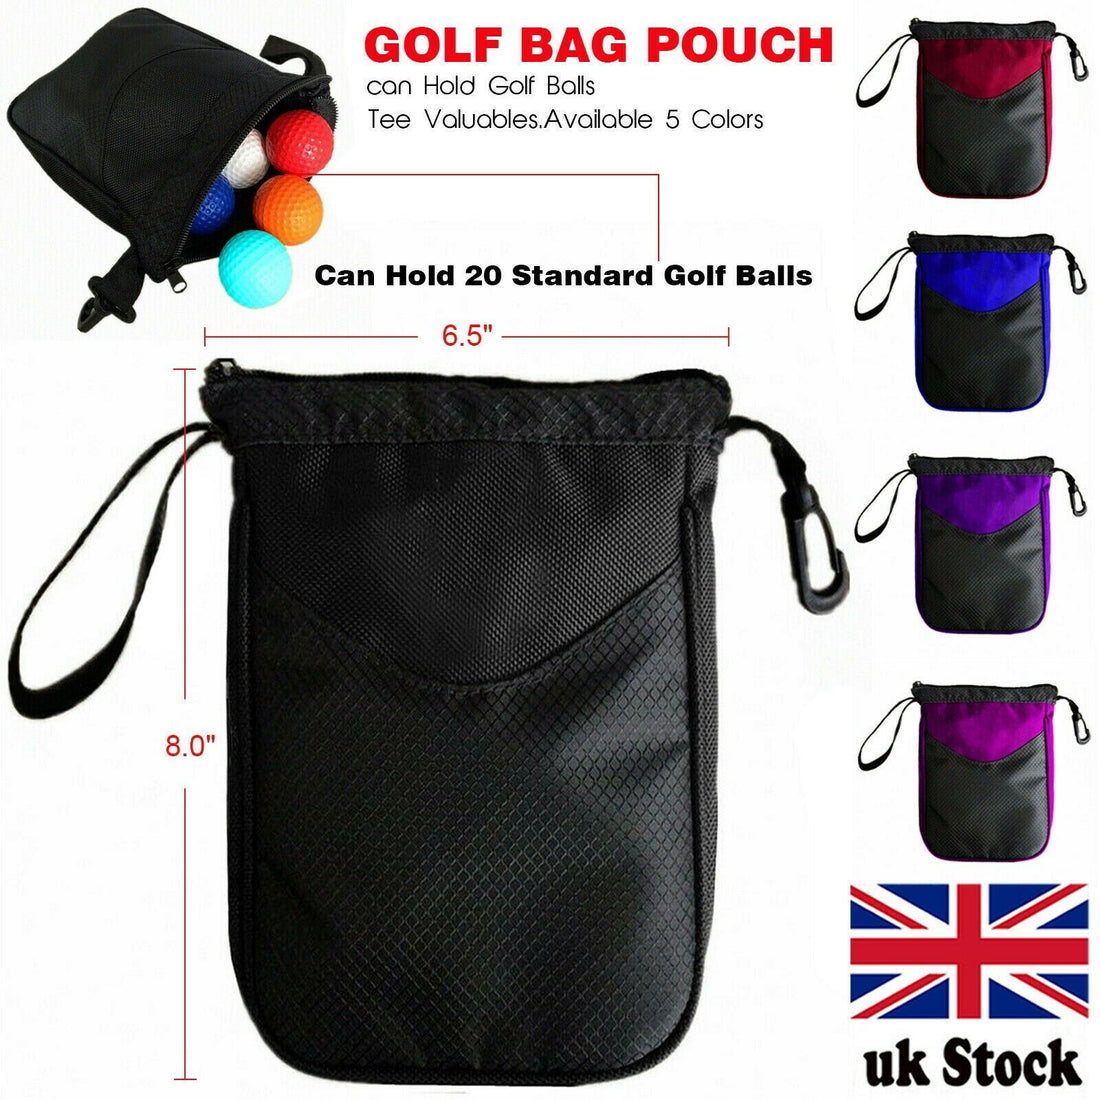 YNR Golf Tee Pouch Bags Valuables Clips Inner Zipper Bag Hold 10 Balls Gifts